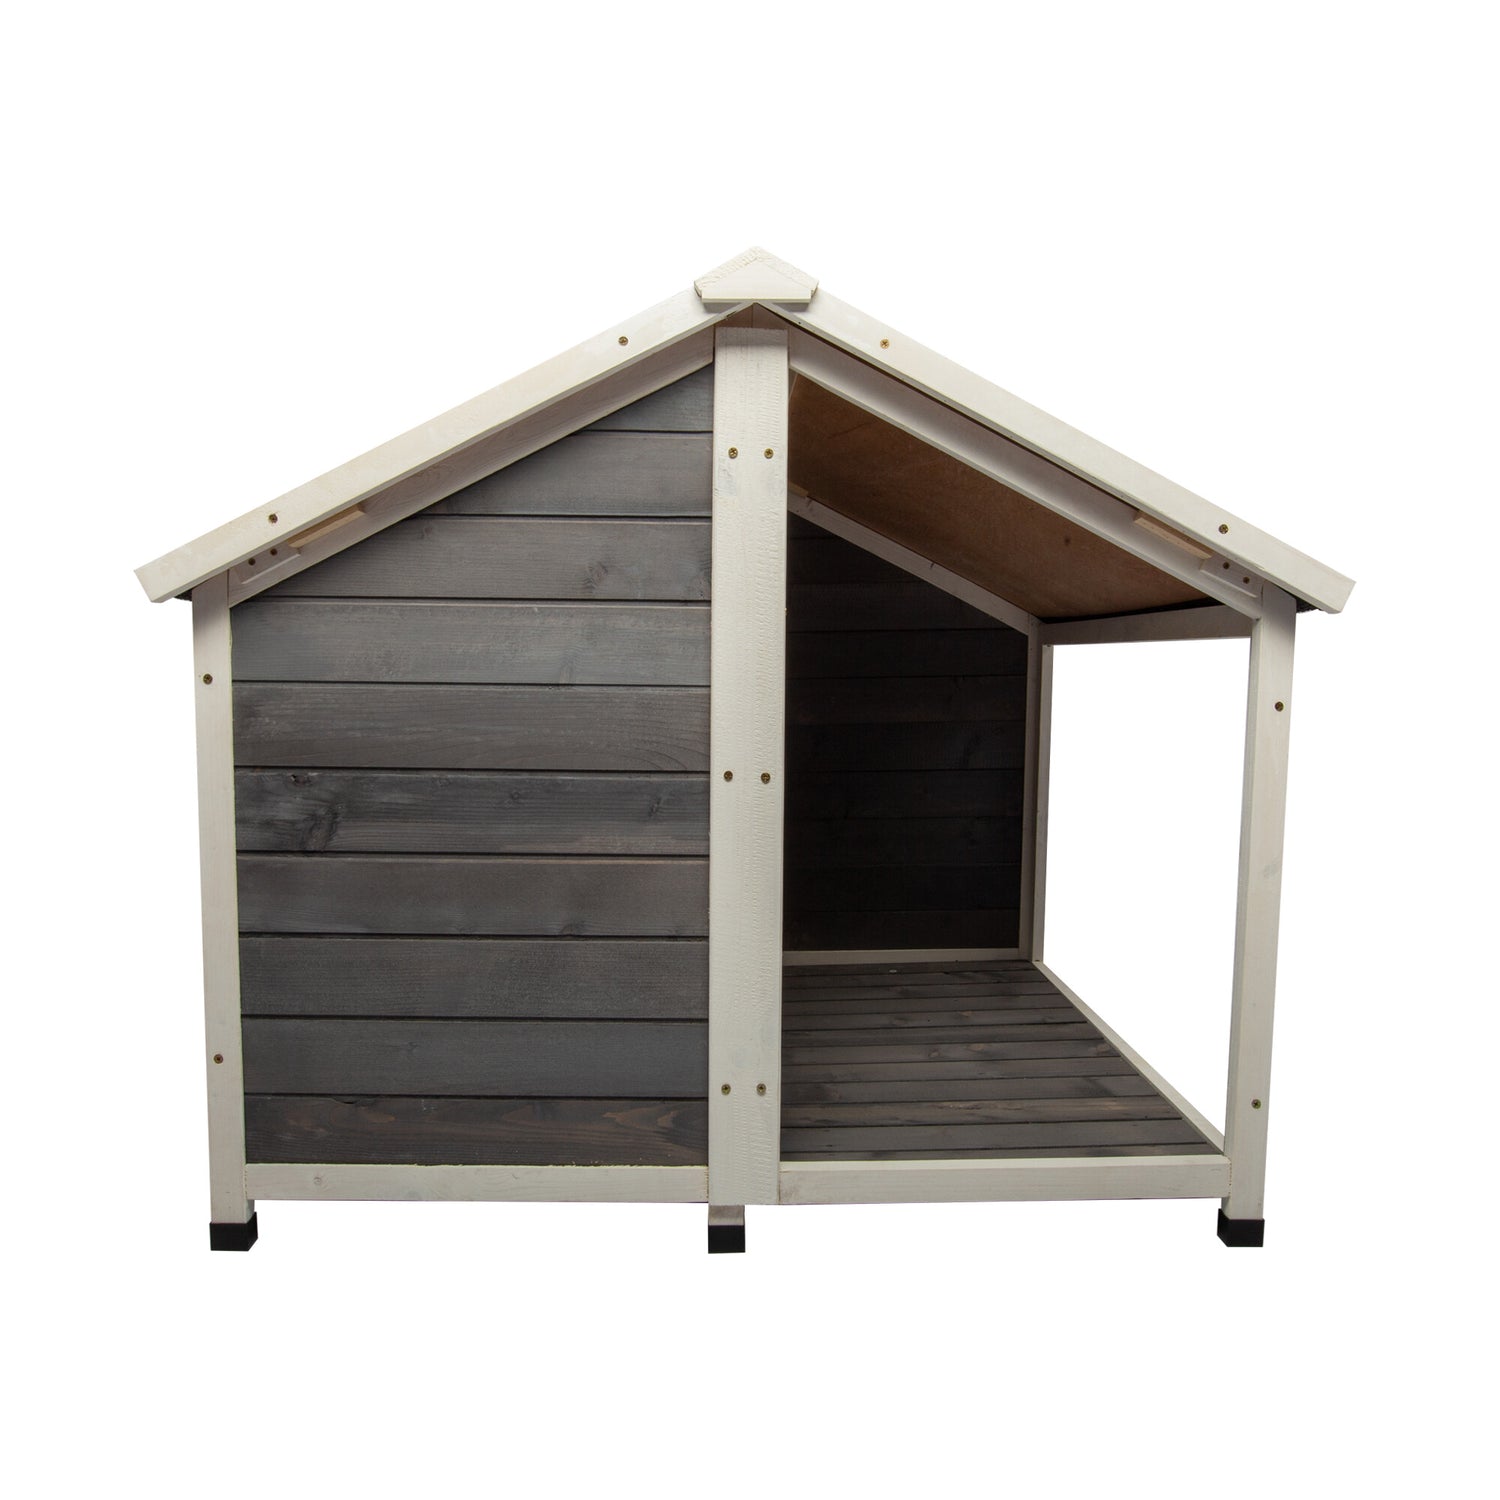 MASBEKTE Dog House Outdoor Medium Puppy Wooden Dog House Pet Shelter with Roof